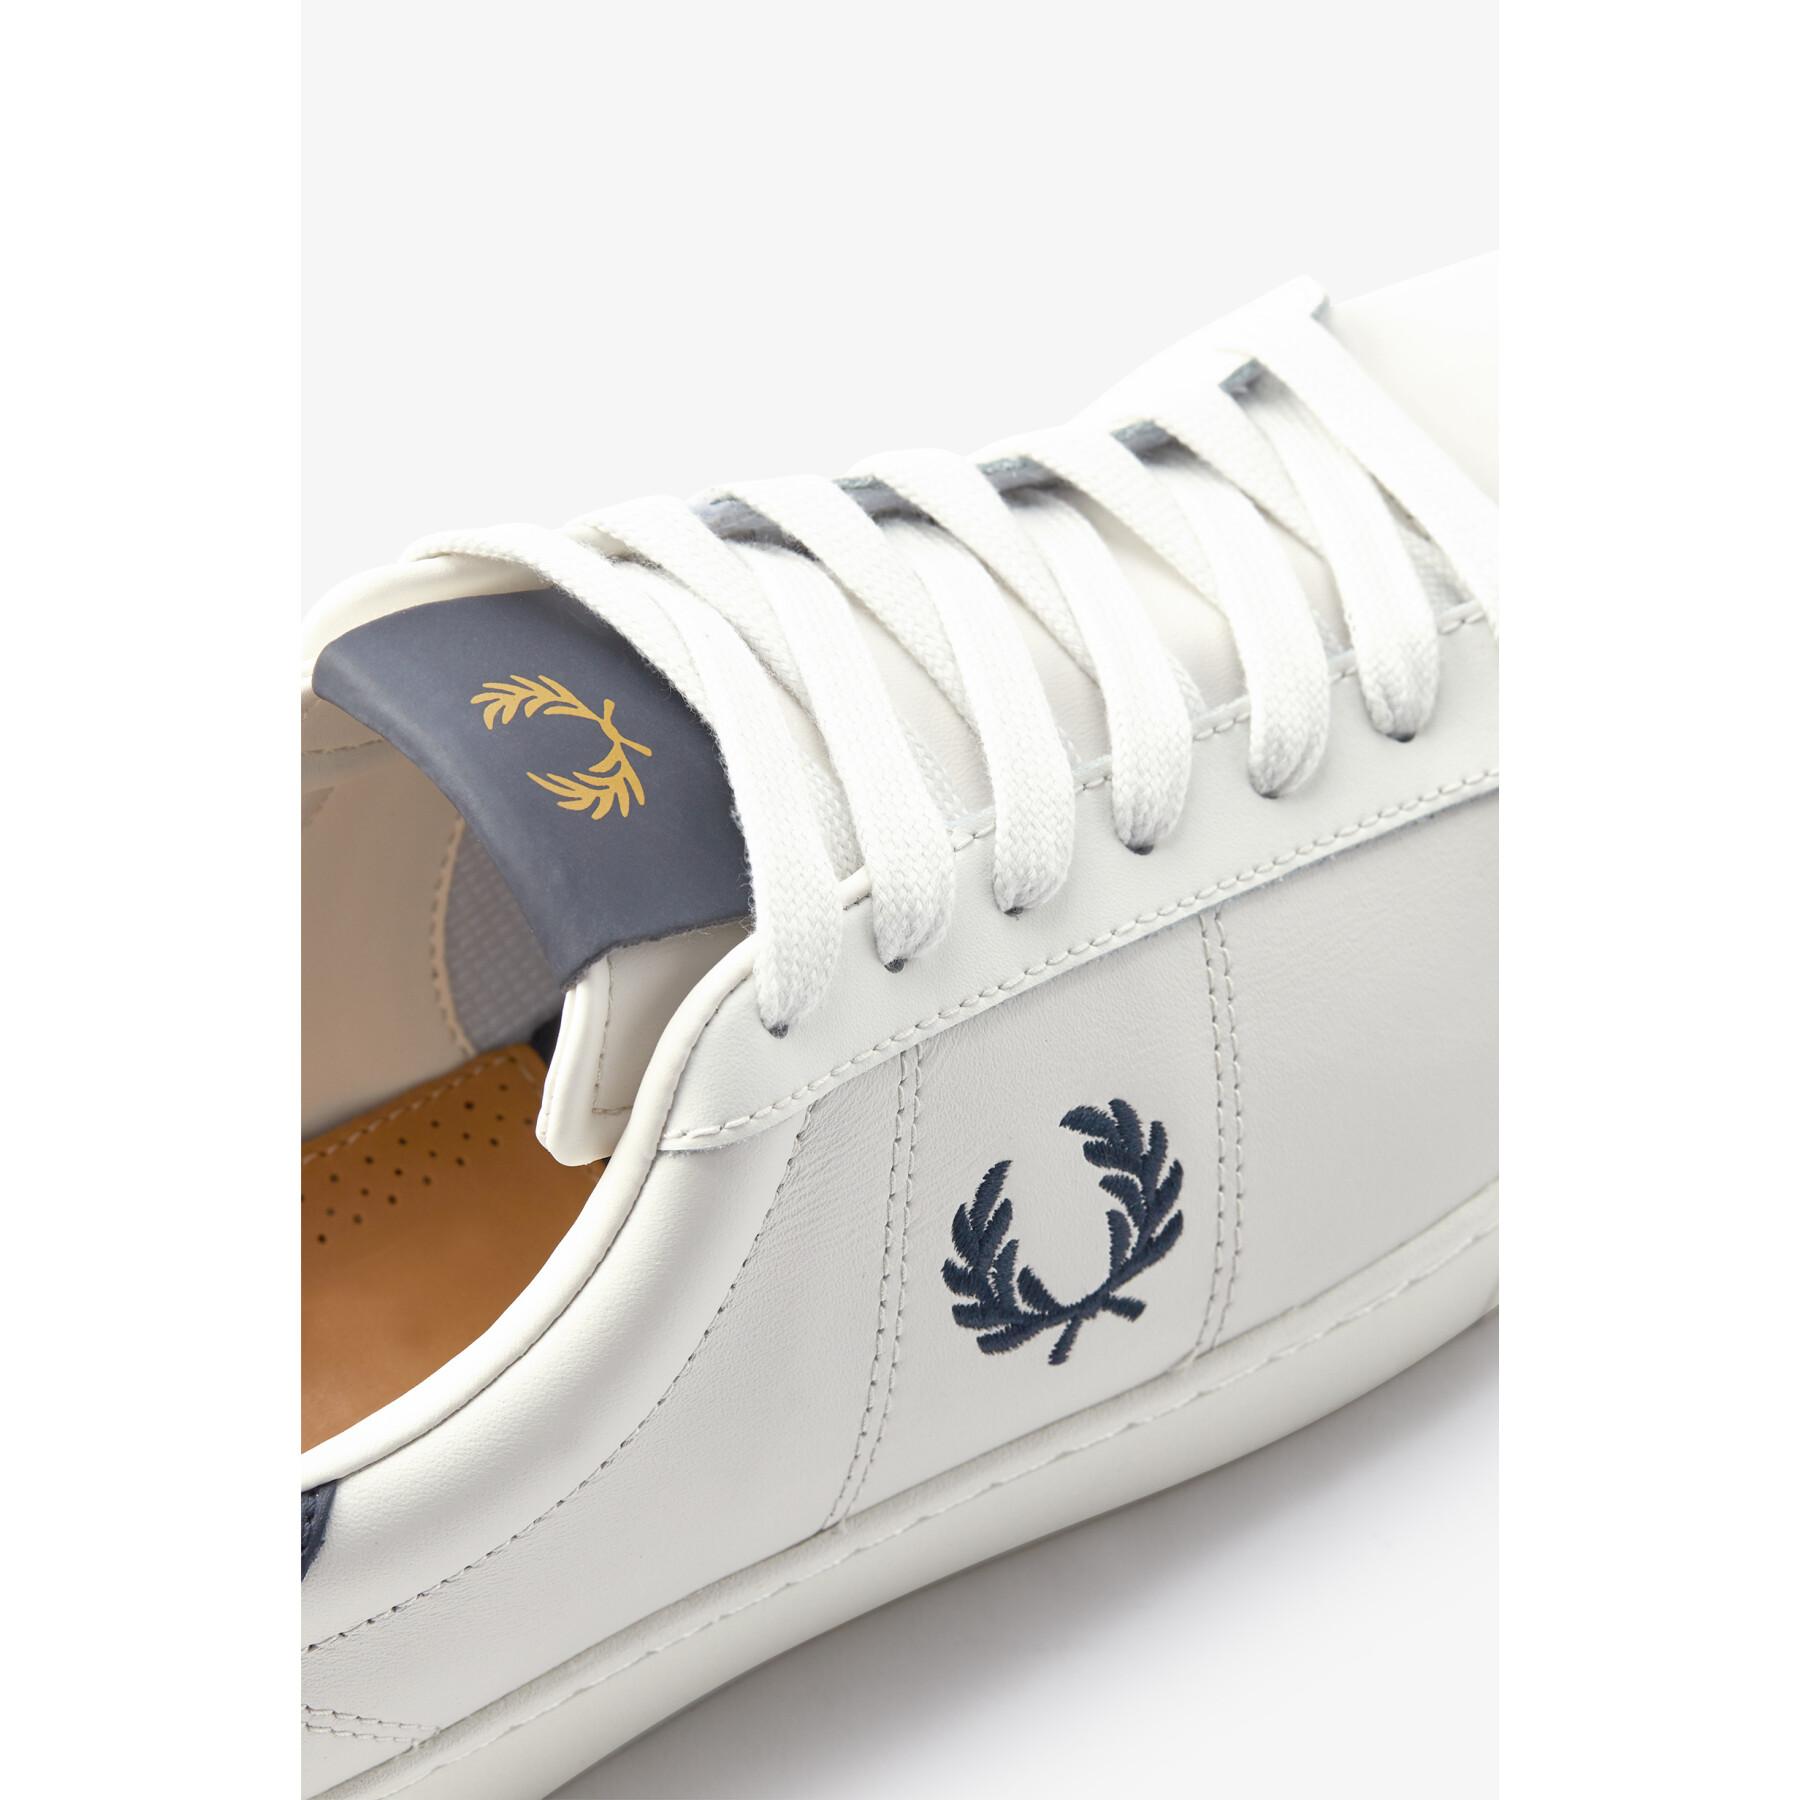 Formadores Fred Perry Spencer Leather